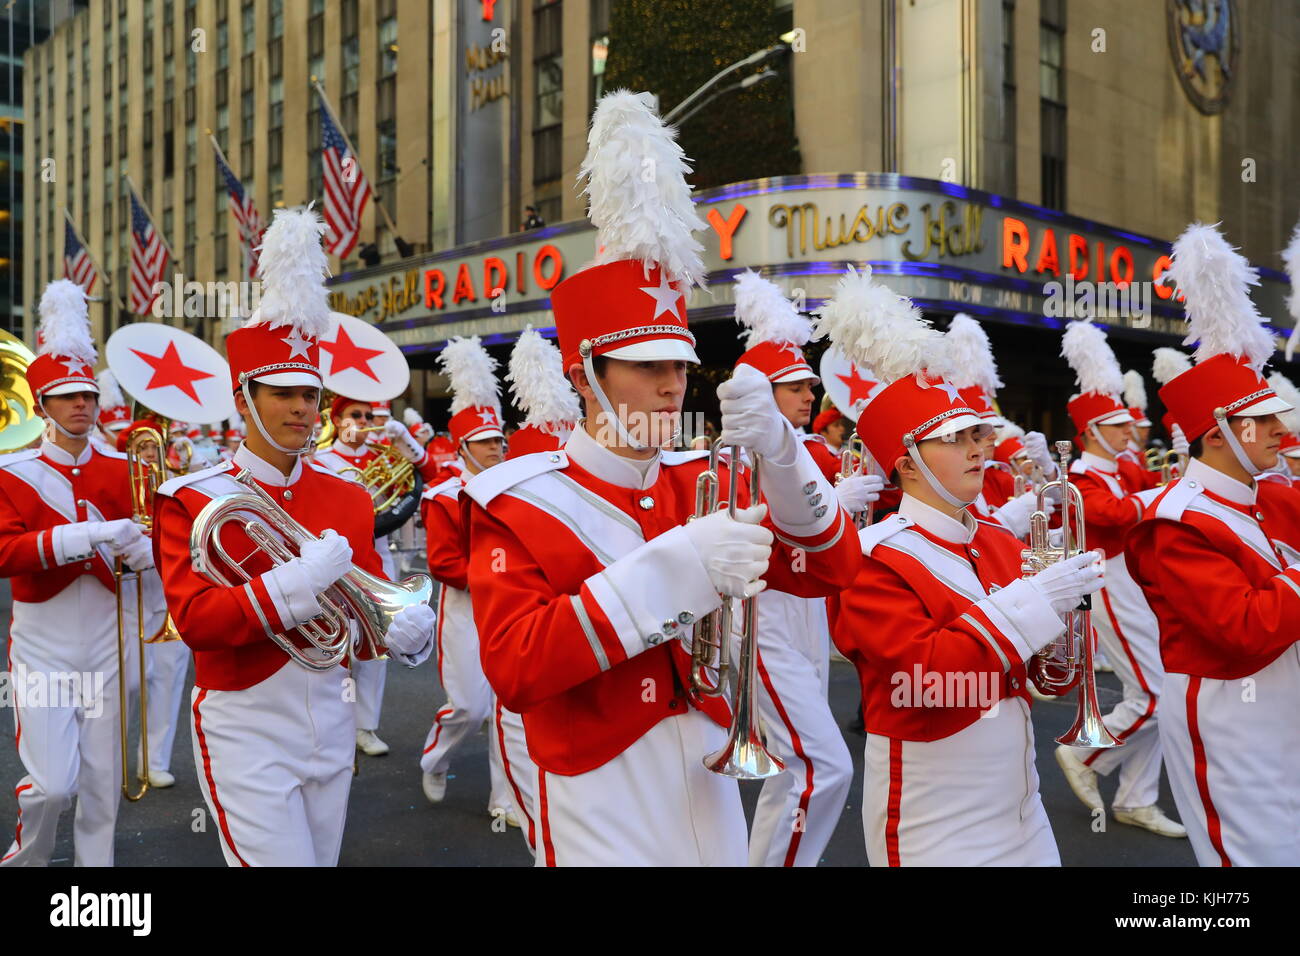 New York, USA. 23rd Nov, 2017. The Macy's Great American Marching Band marches in the 91st Macys Thanksgiving Day Parade in New York, Nov. 23, 2017. Credit: Gordon Donovan/Alamy Live News Stock Photo